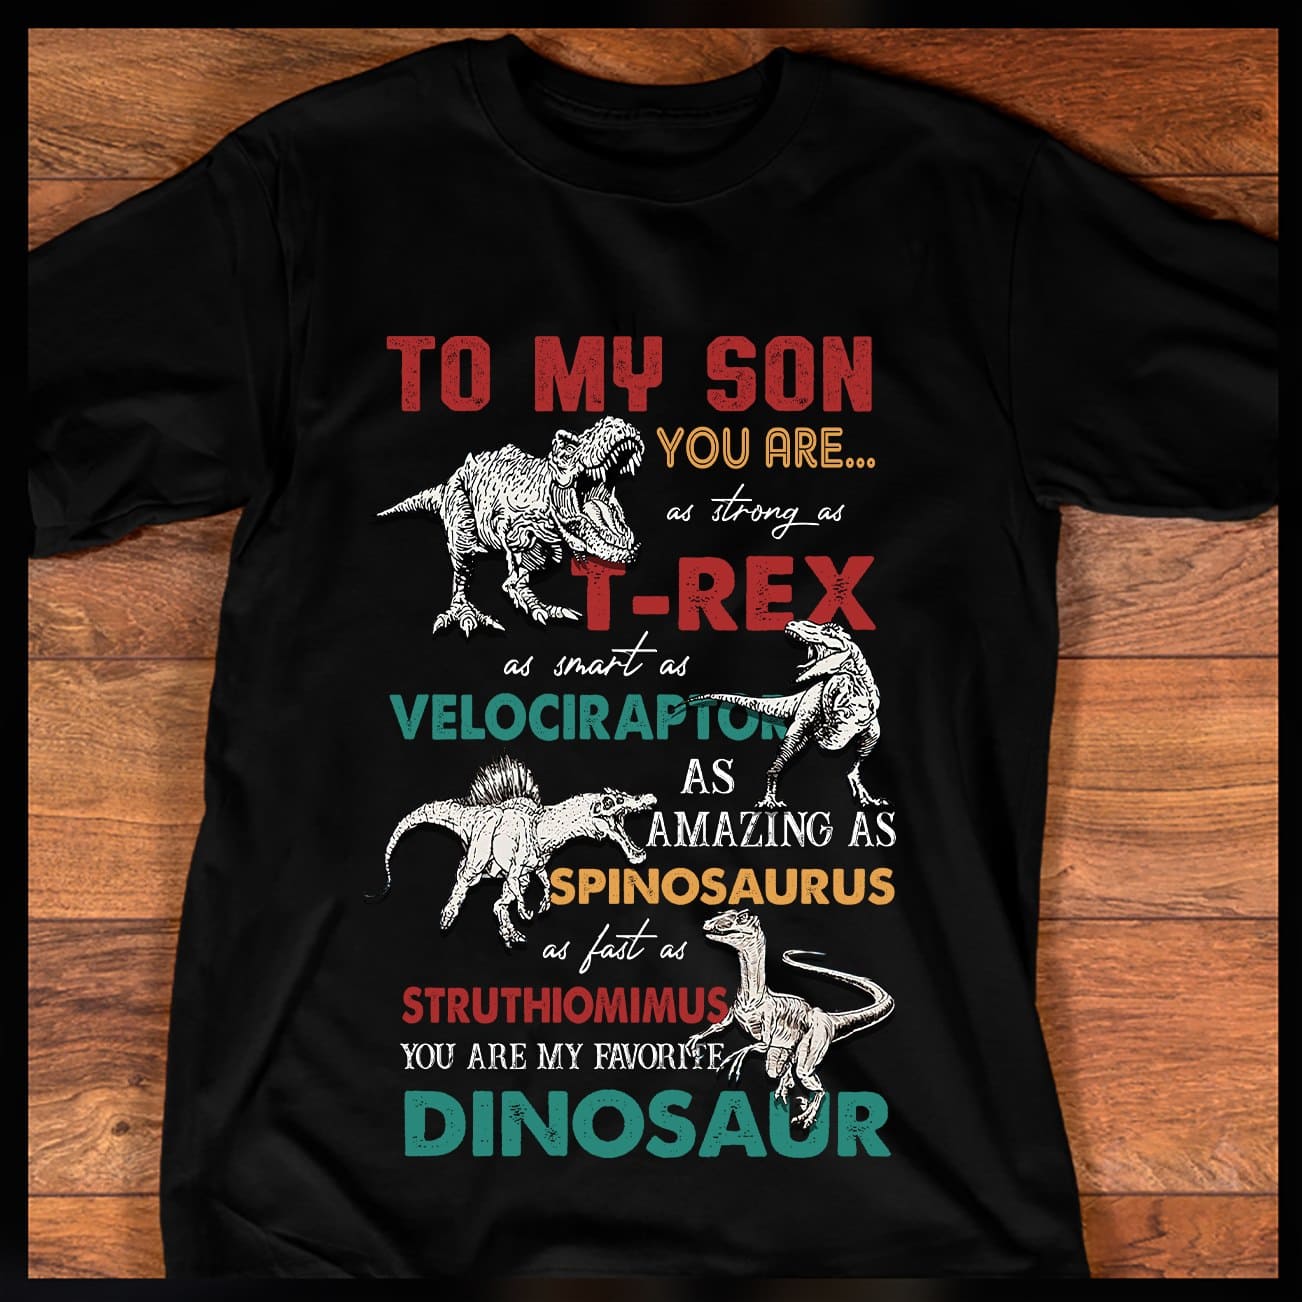 To my son you are as strong as T-rex, smart as velociraptor, amazing as Spinosaurus, Dinosaur graphic T-shirt